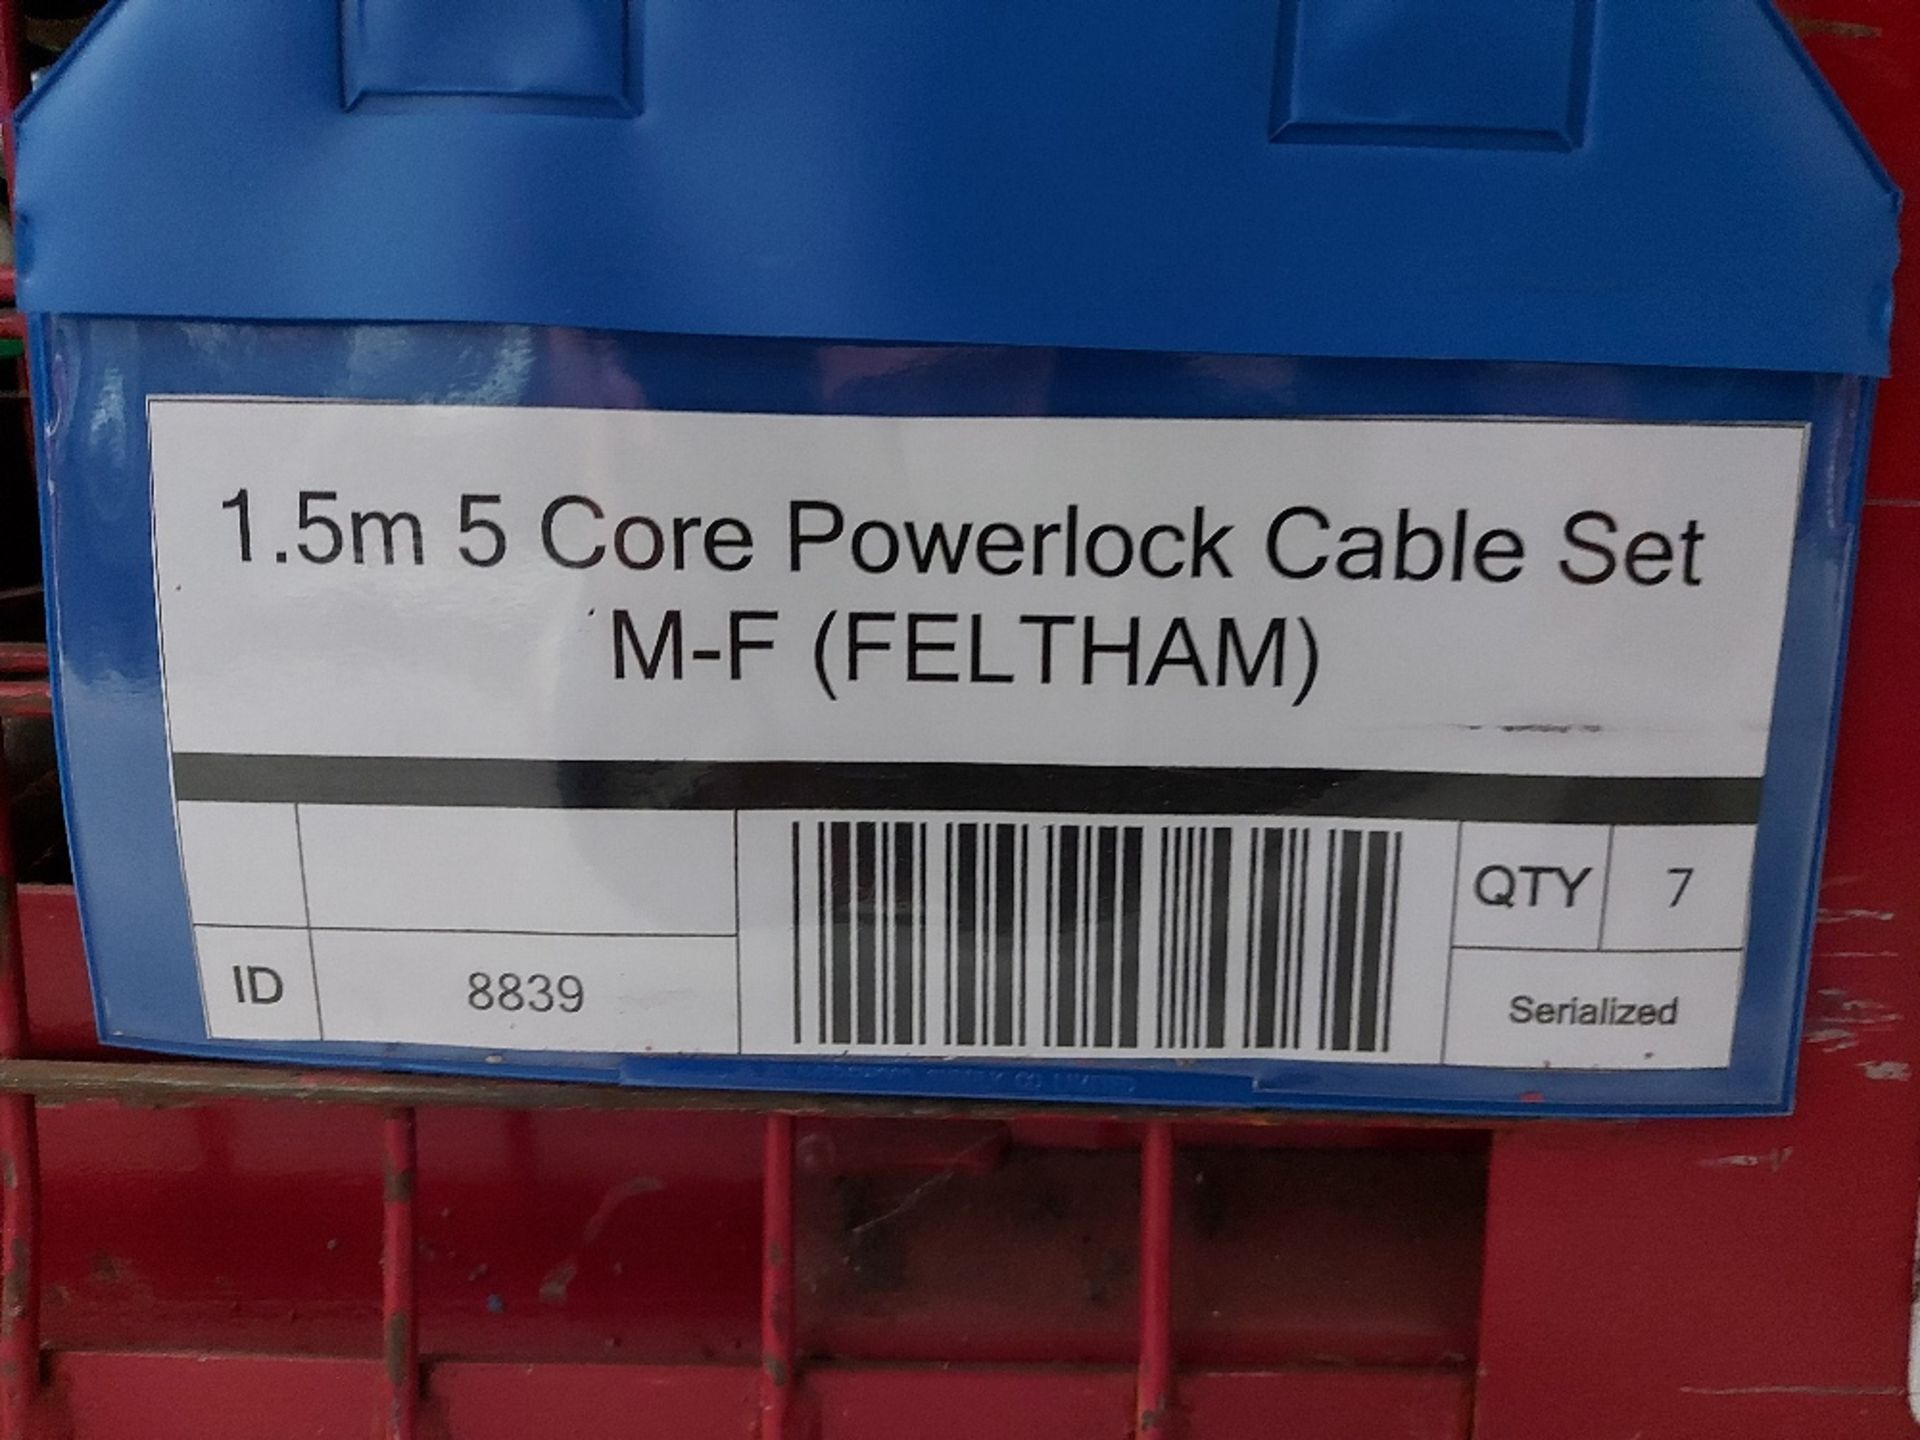 Large Quantity of 1.5m 5 Core Powerlock Cable Set M-F with Steel Fabricated Stillage - Image 4 of 4